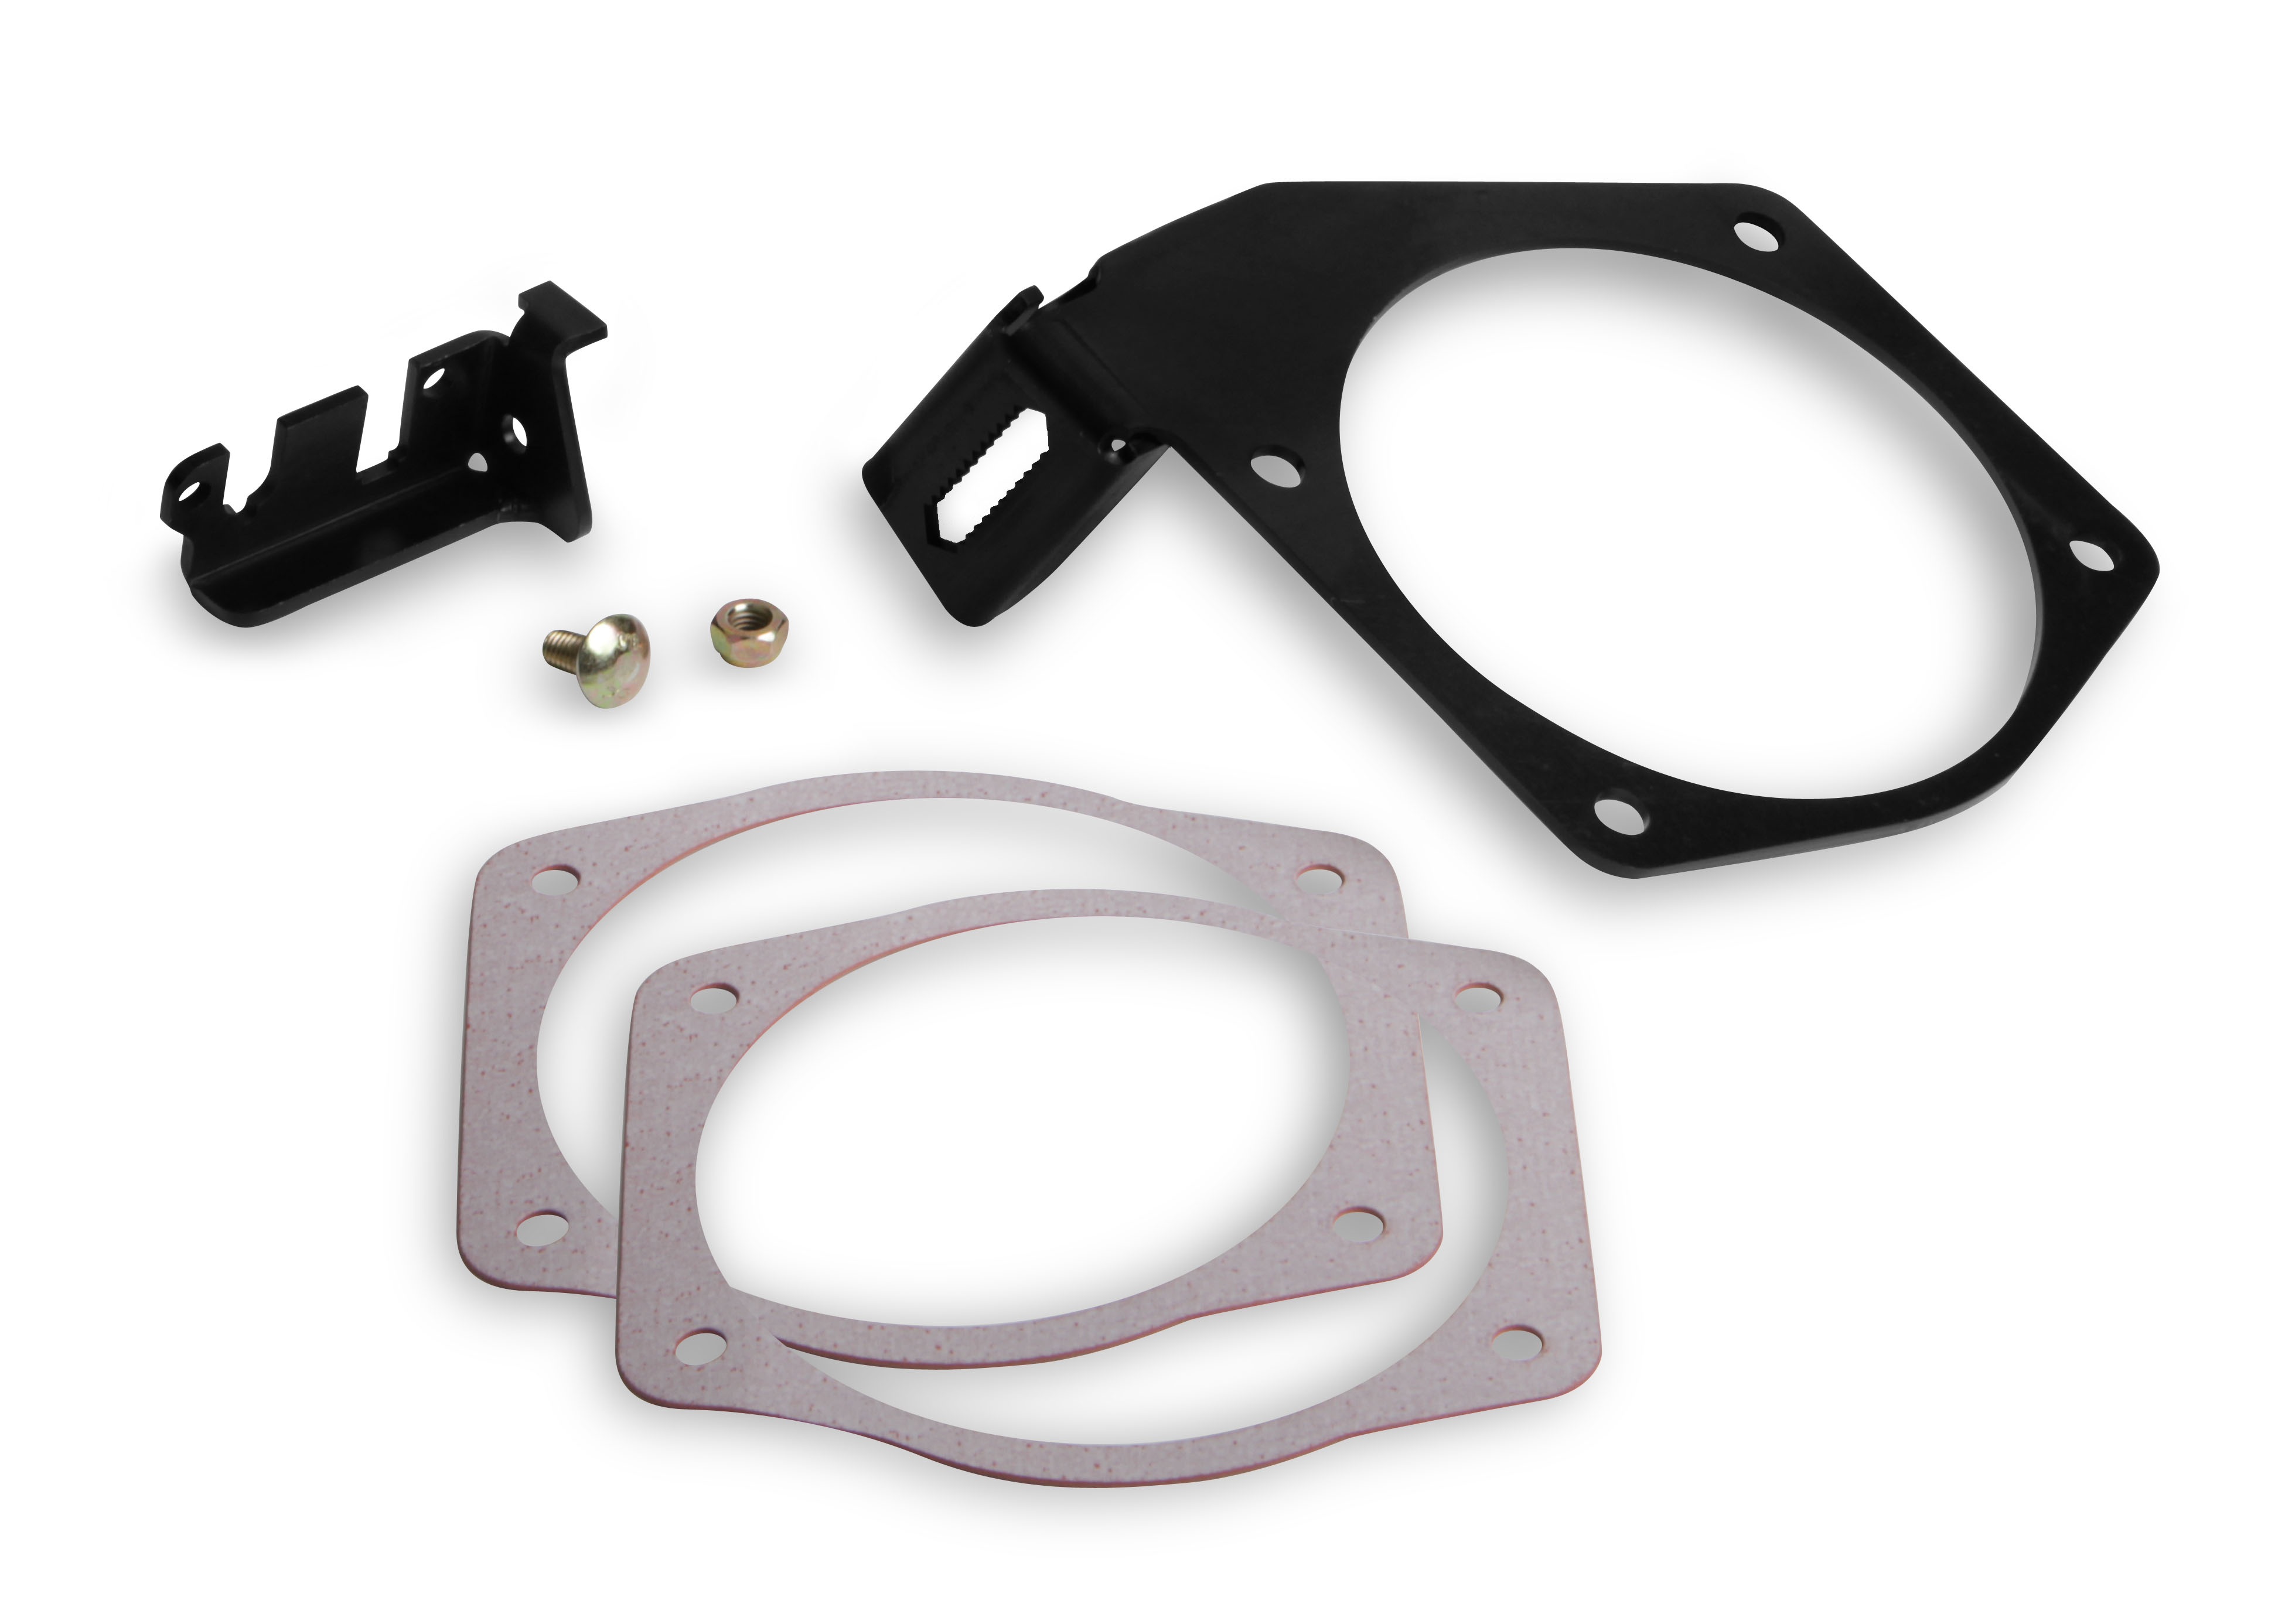 LS Holley Cable Bracket for 95mm Throttle Bodies & Factory or FAST Style Intakes